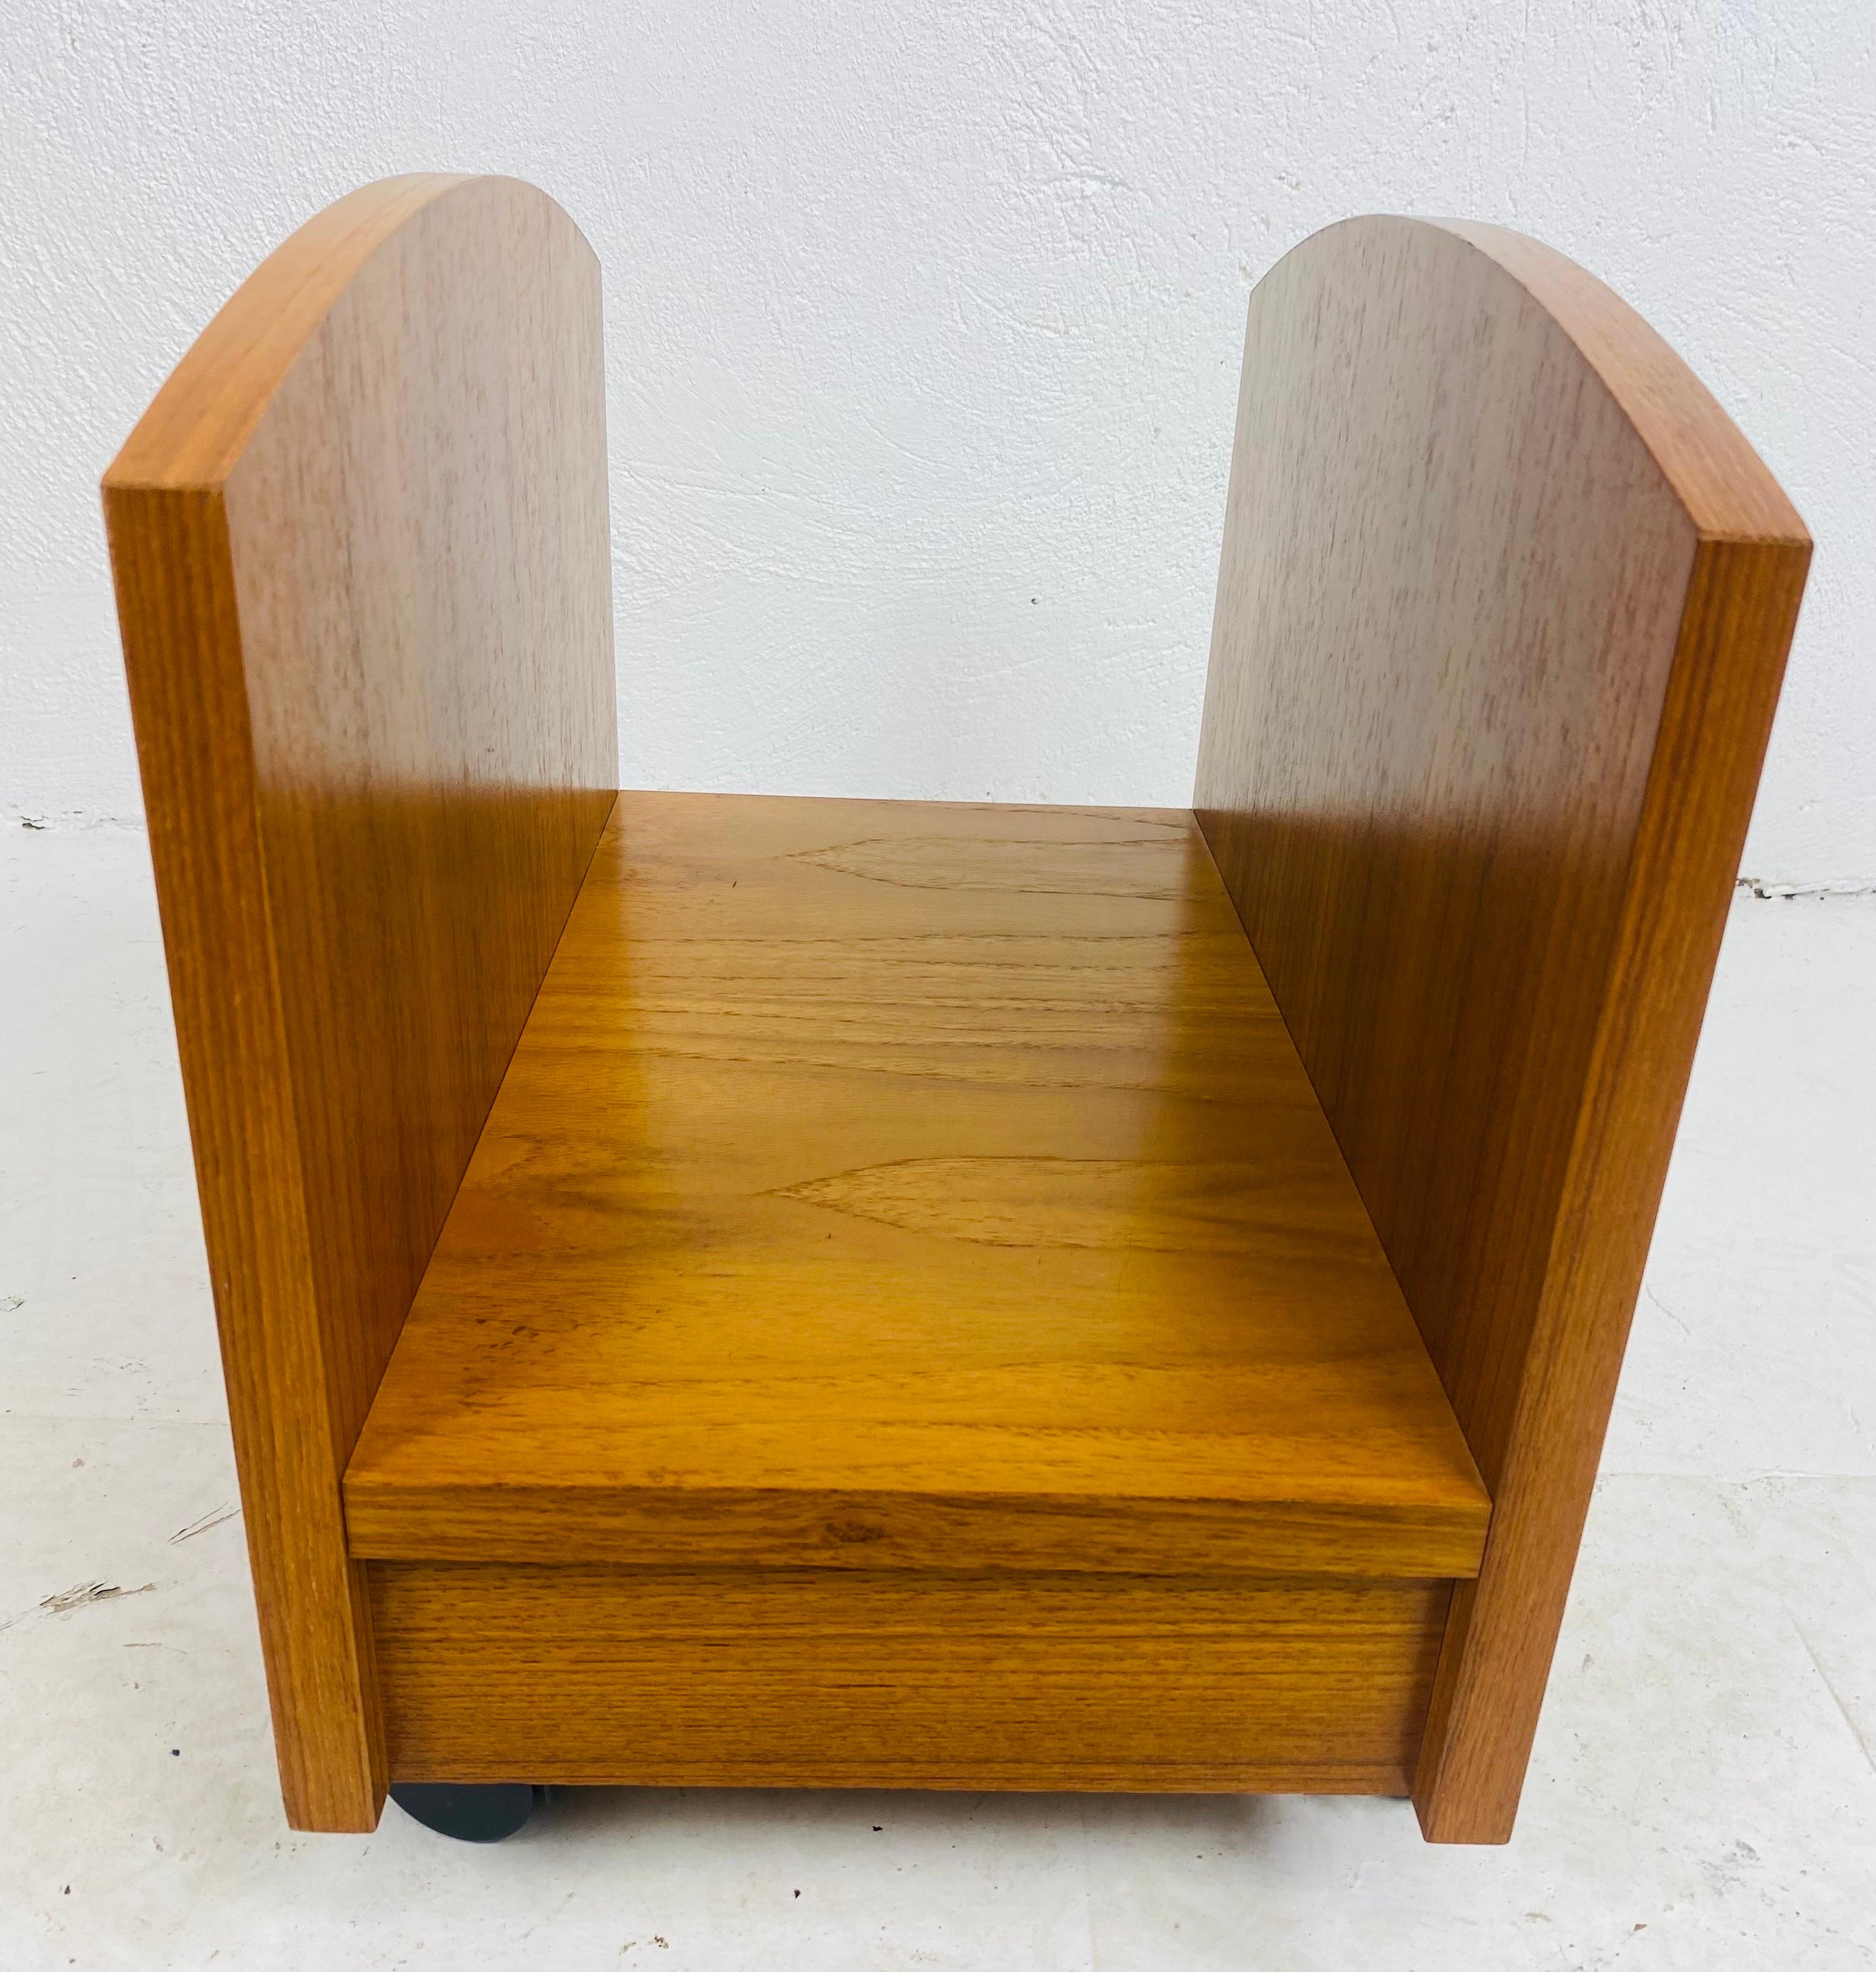 This is a mid century modern danish magazine rack. This teak magazine rack rests on for black wheels. This teak magazine rack has a soft golden tone to the finish. This piece was made in Denmark circa 1960.